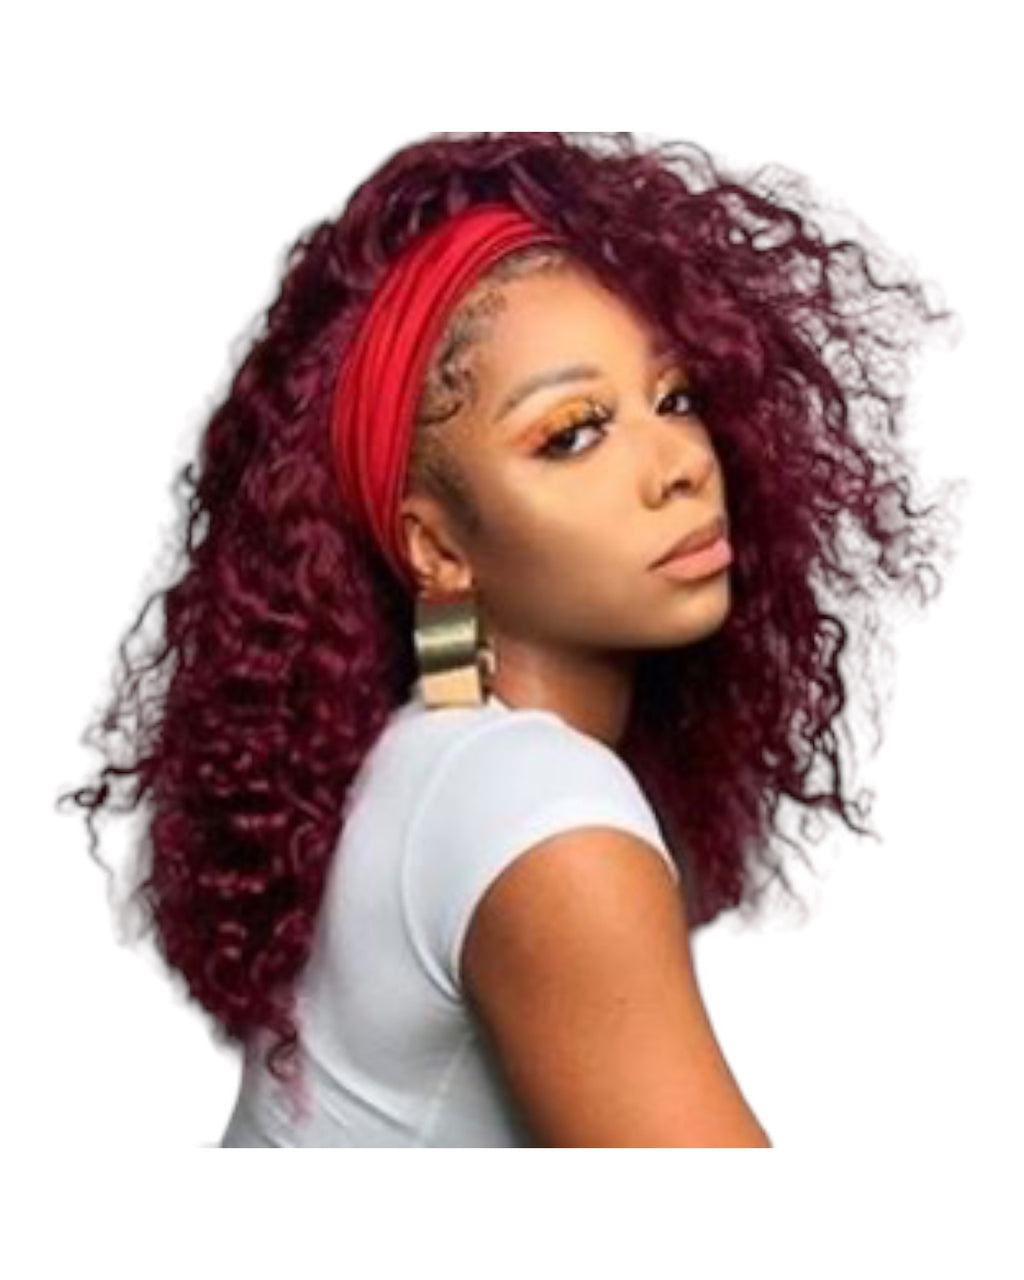 Sugar plum with Natl Blk Root 1B-99J 16” 180% Density. Wigs can be dyed. Cap straps adjustable, circumference medium-20 inches. Easy on the go beginner friendly.